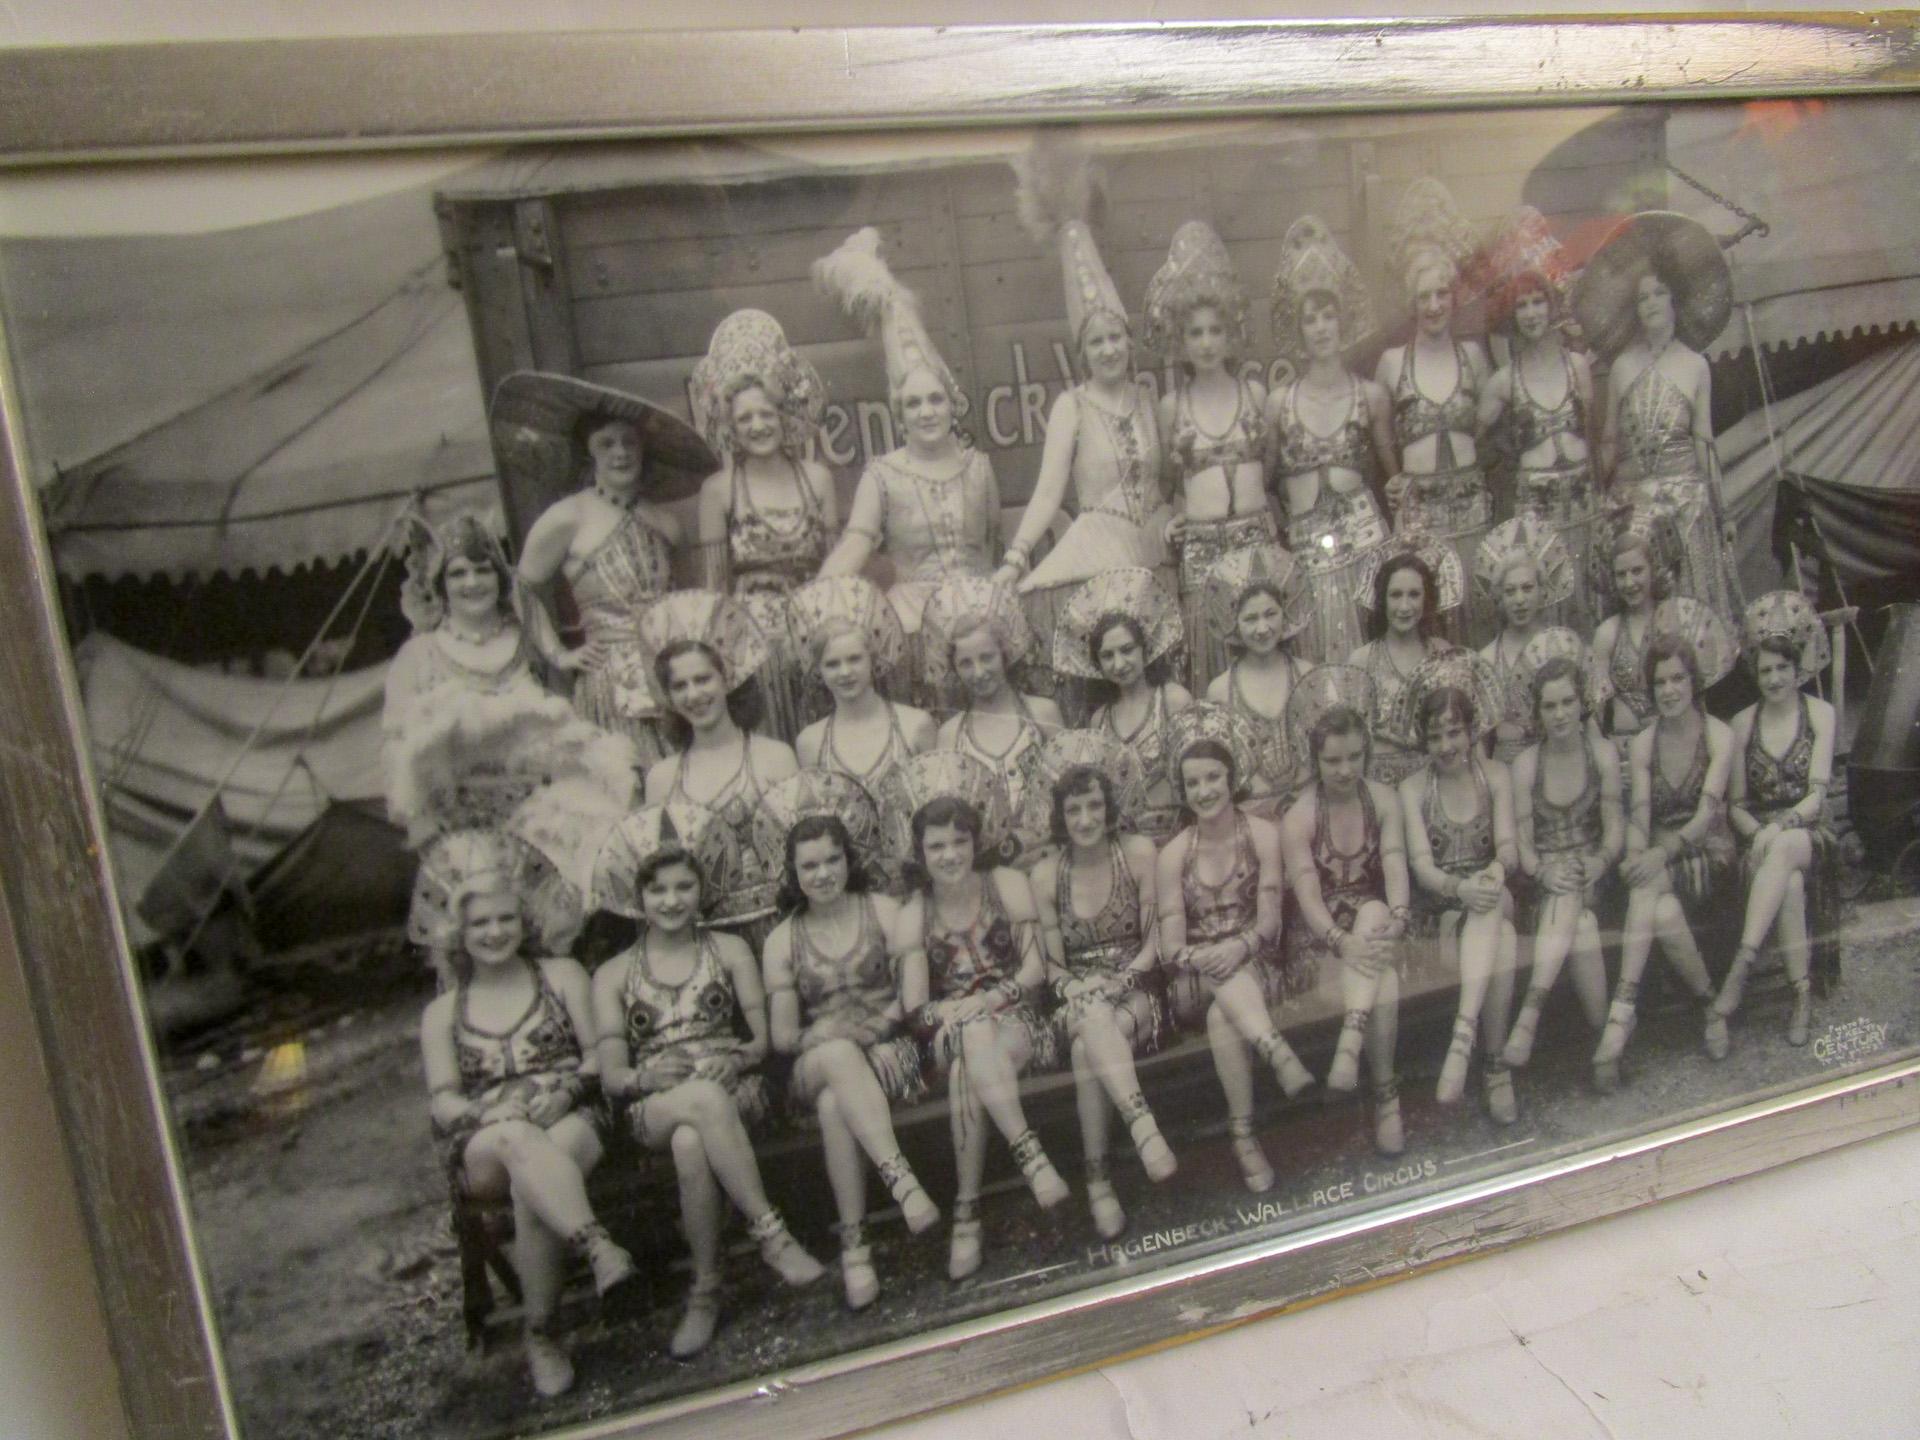 Dated June 22, 1933 this black and white photograph features twenty nine lady Hagenbeck Wallace Circus performers in full regalia with a circus wagon and tents in the background. Very detailed costumes including one ostrich feathered fan dancer.